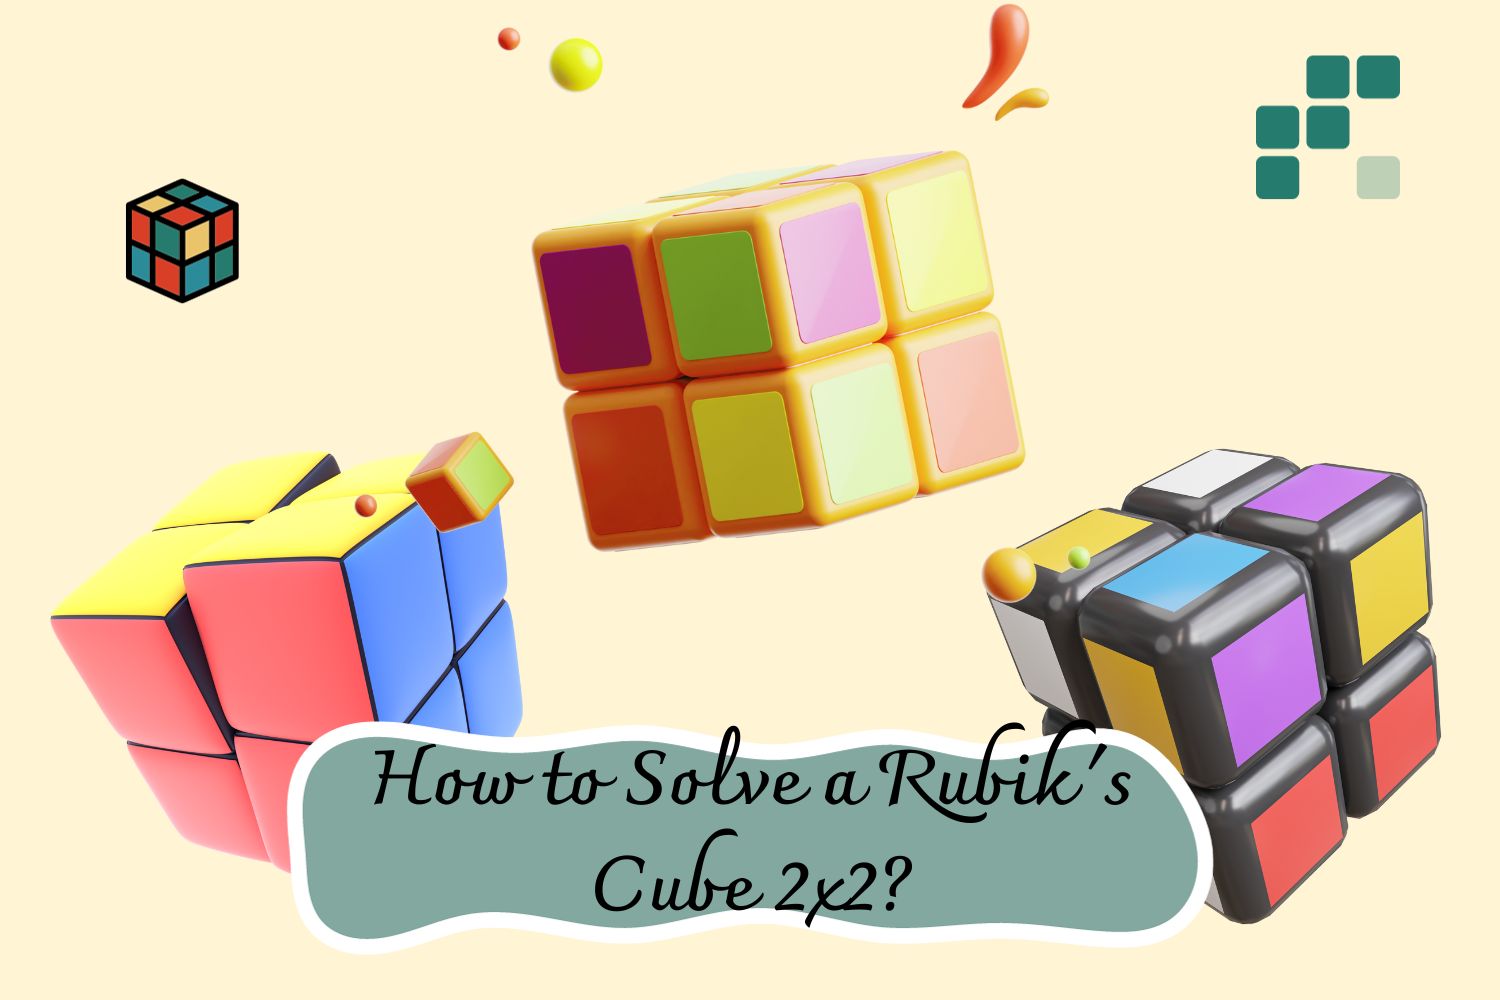 How to Solve a Rubik's Cube 2x2